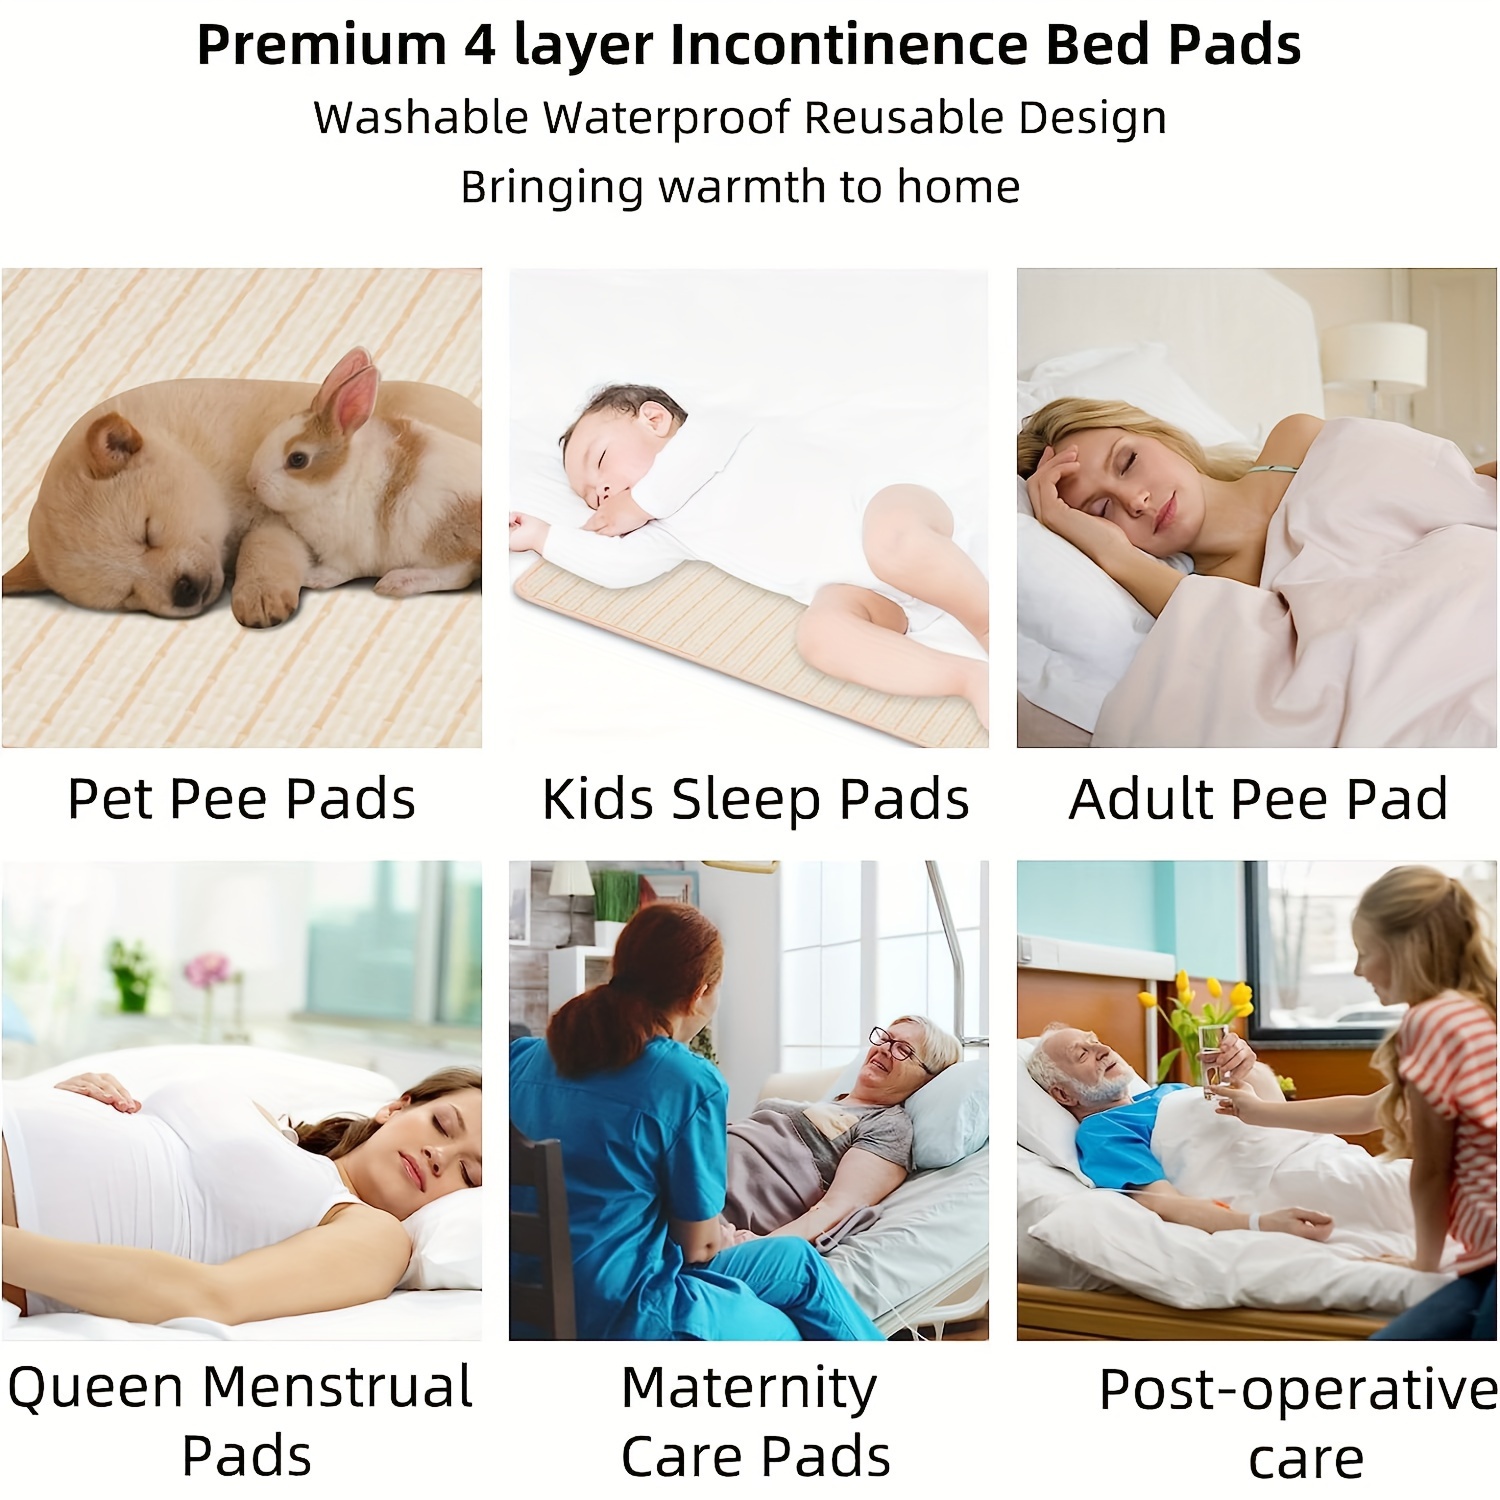 Waterproof Bed Sheet Incontinence Pad For Elderly And Paralyzed Patients -  Large Size Reusable And Washable Urine Pad